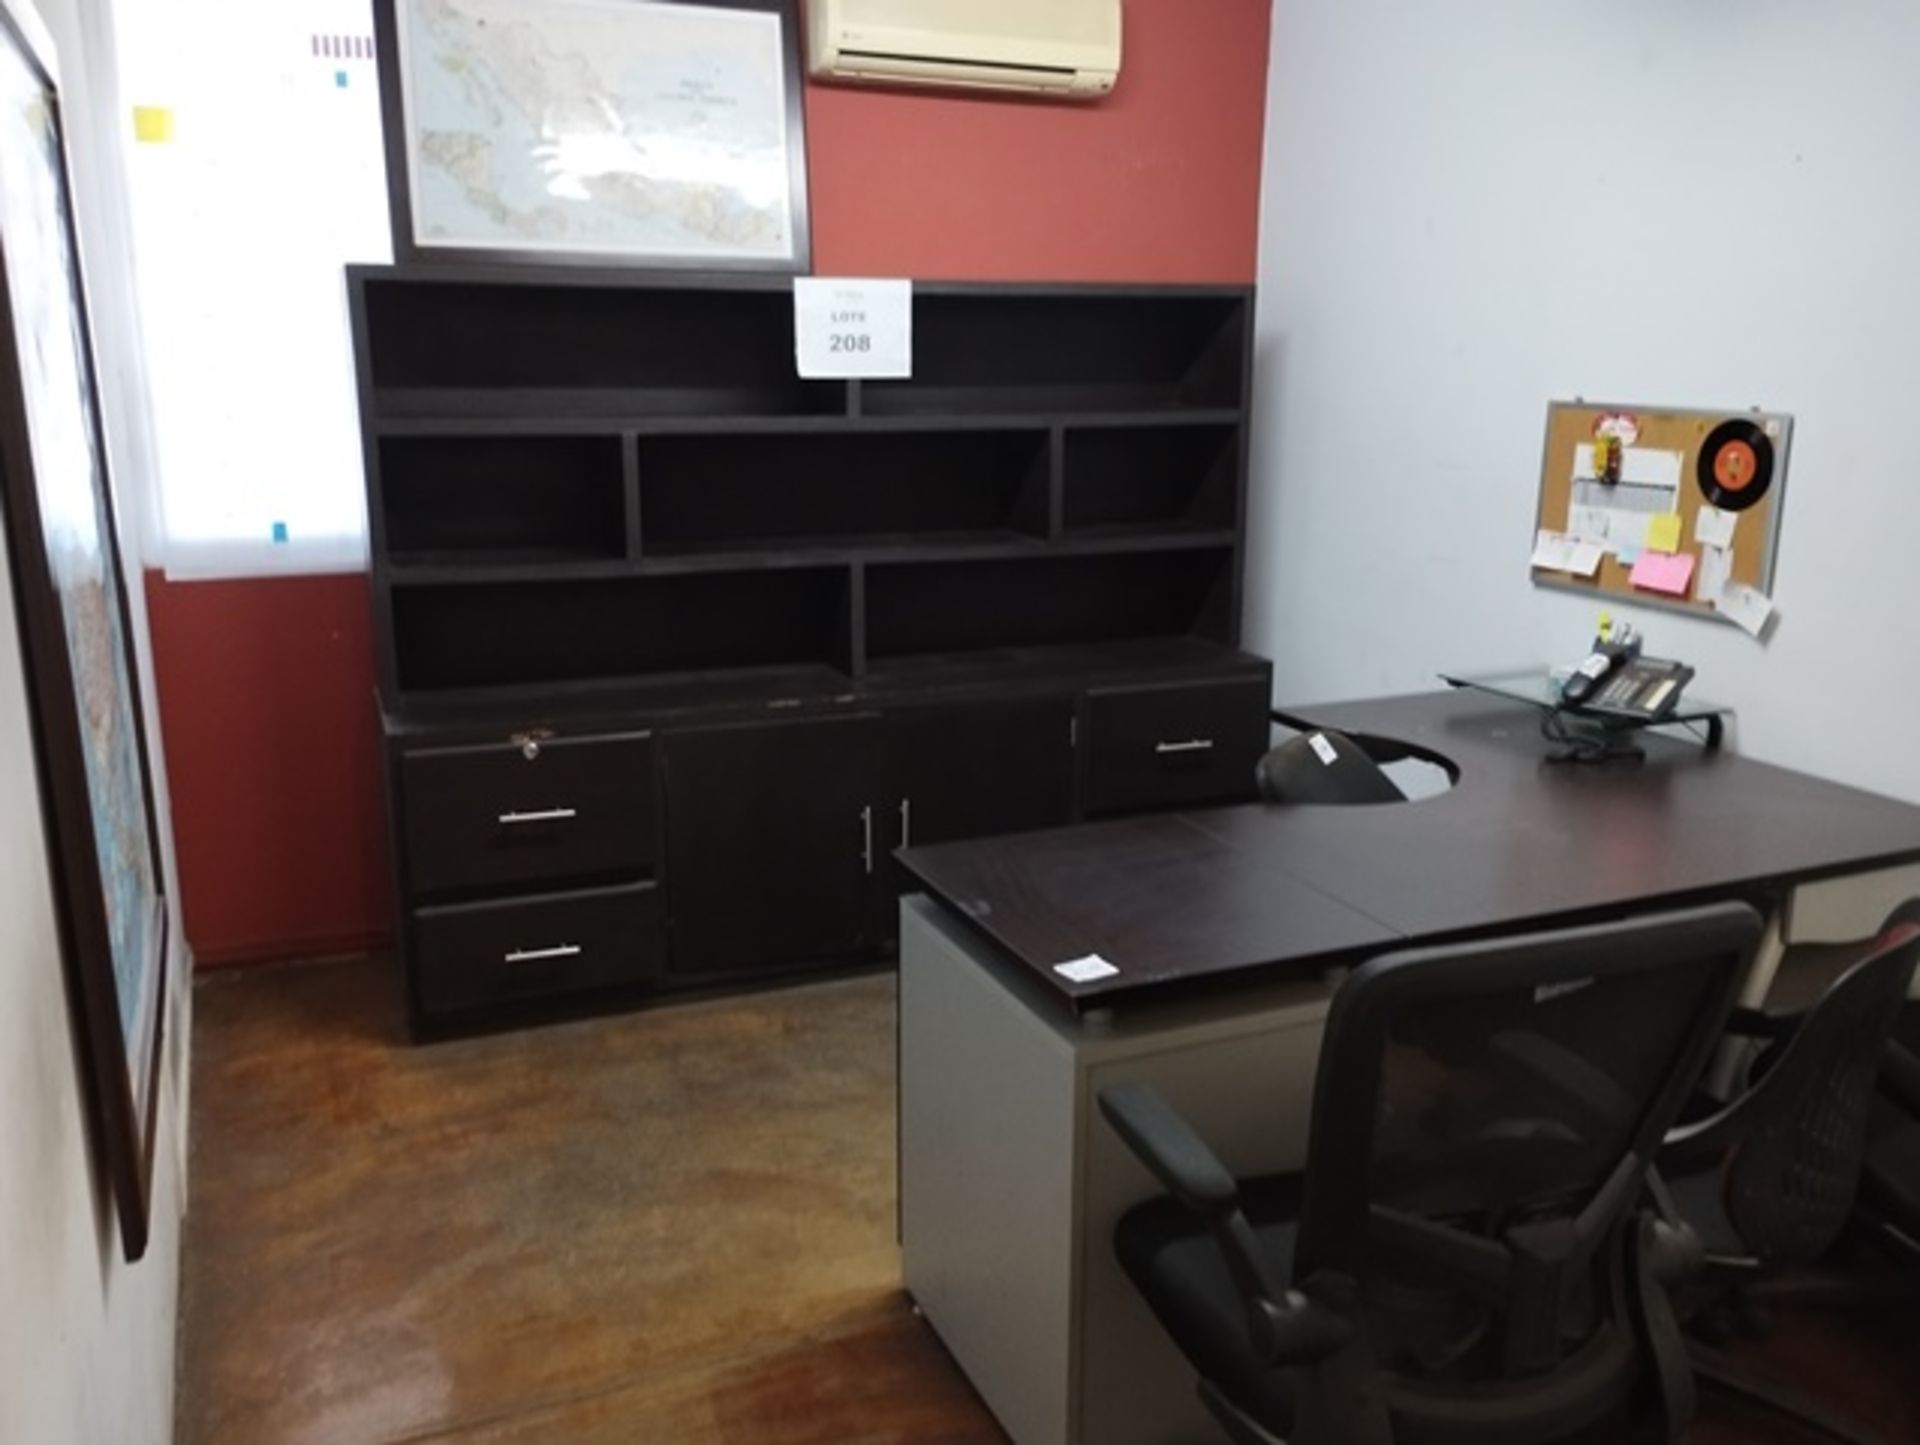 LOT OF OFFICE FURNITURE